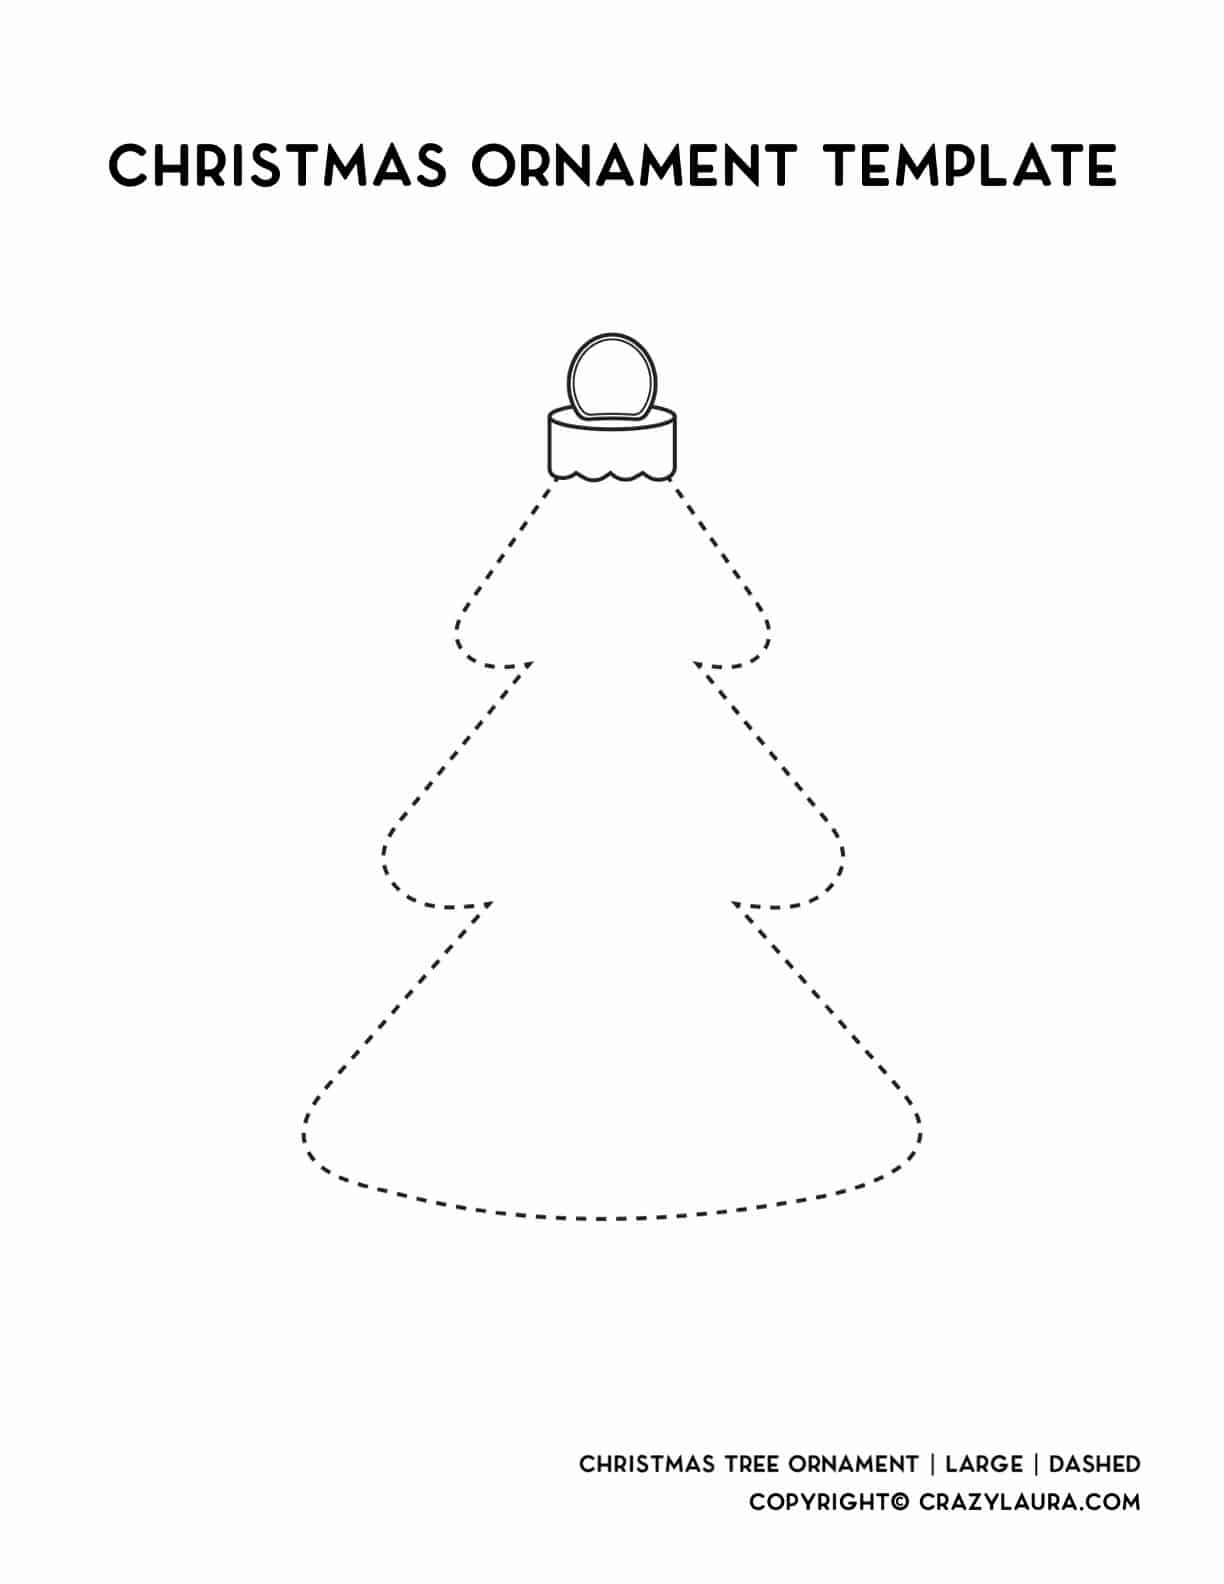 dashed line stencil of christmas tree ornament